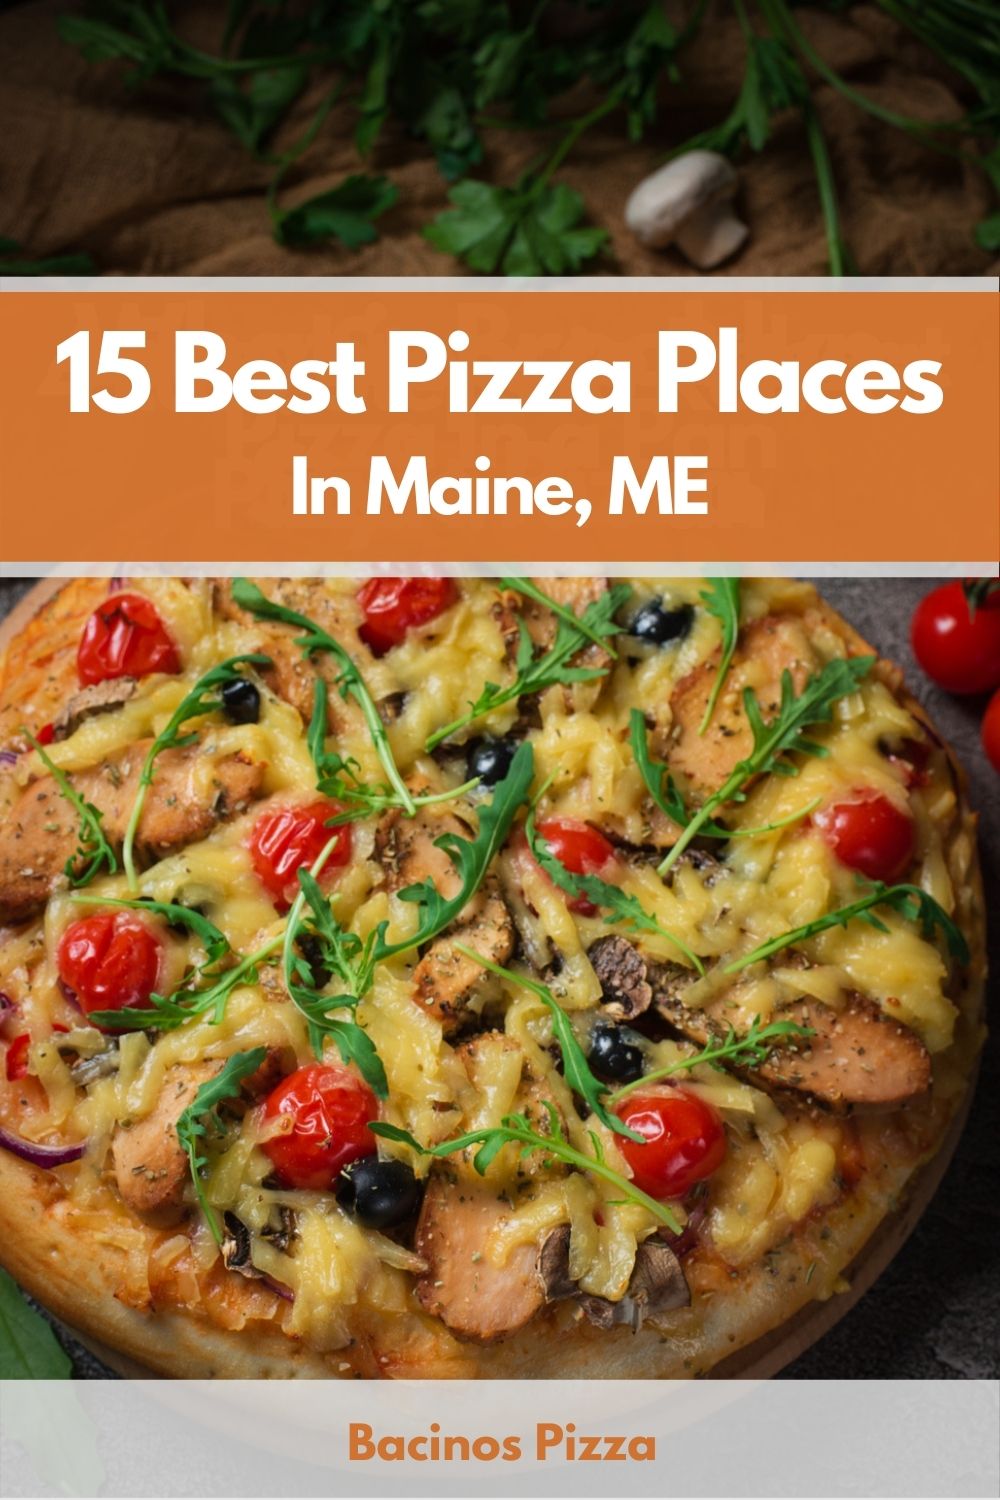 15 Best Pizza Places In Maine, ME pin 2